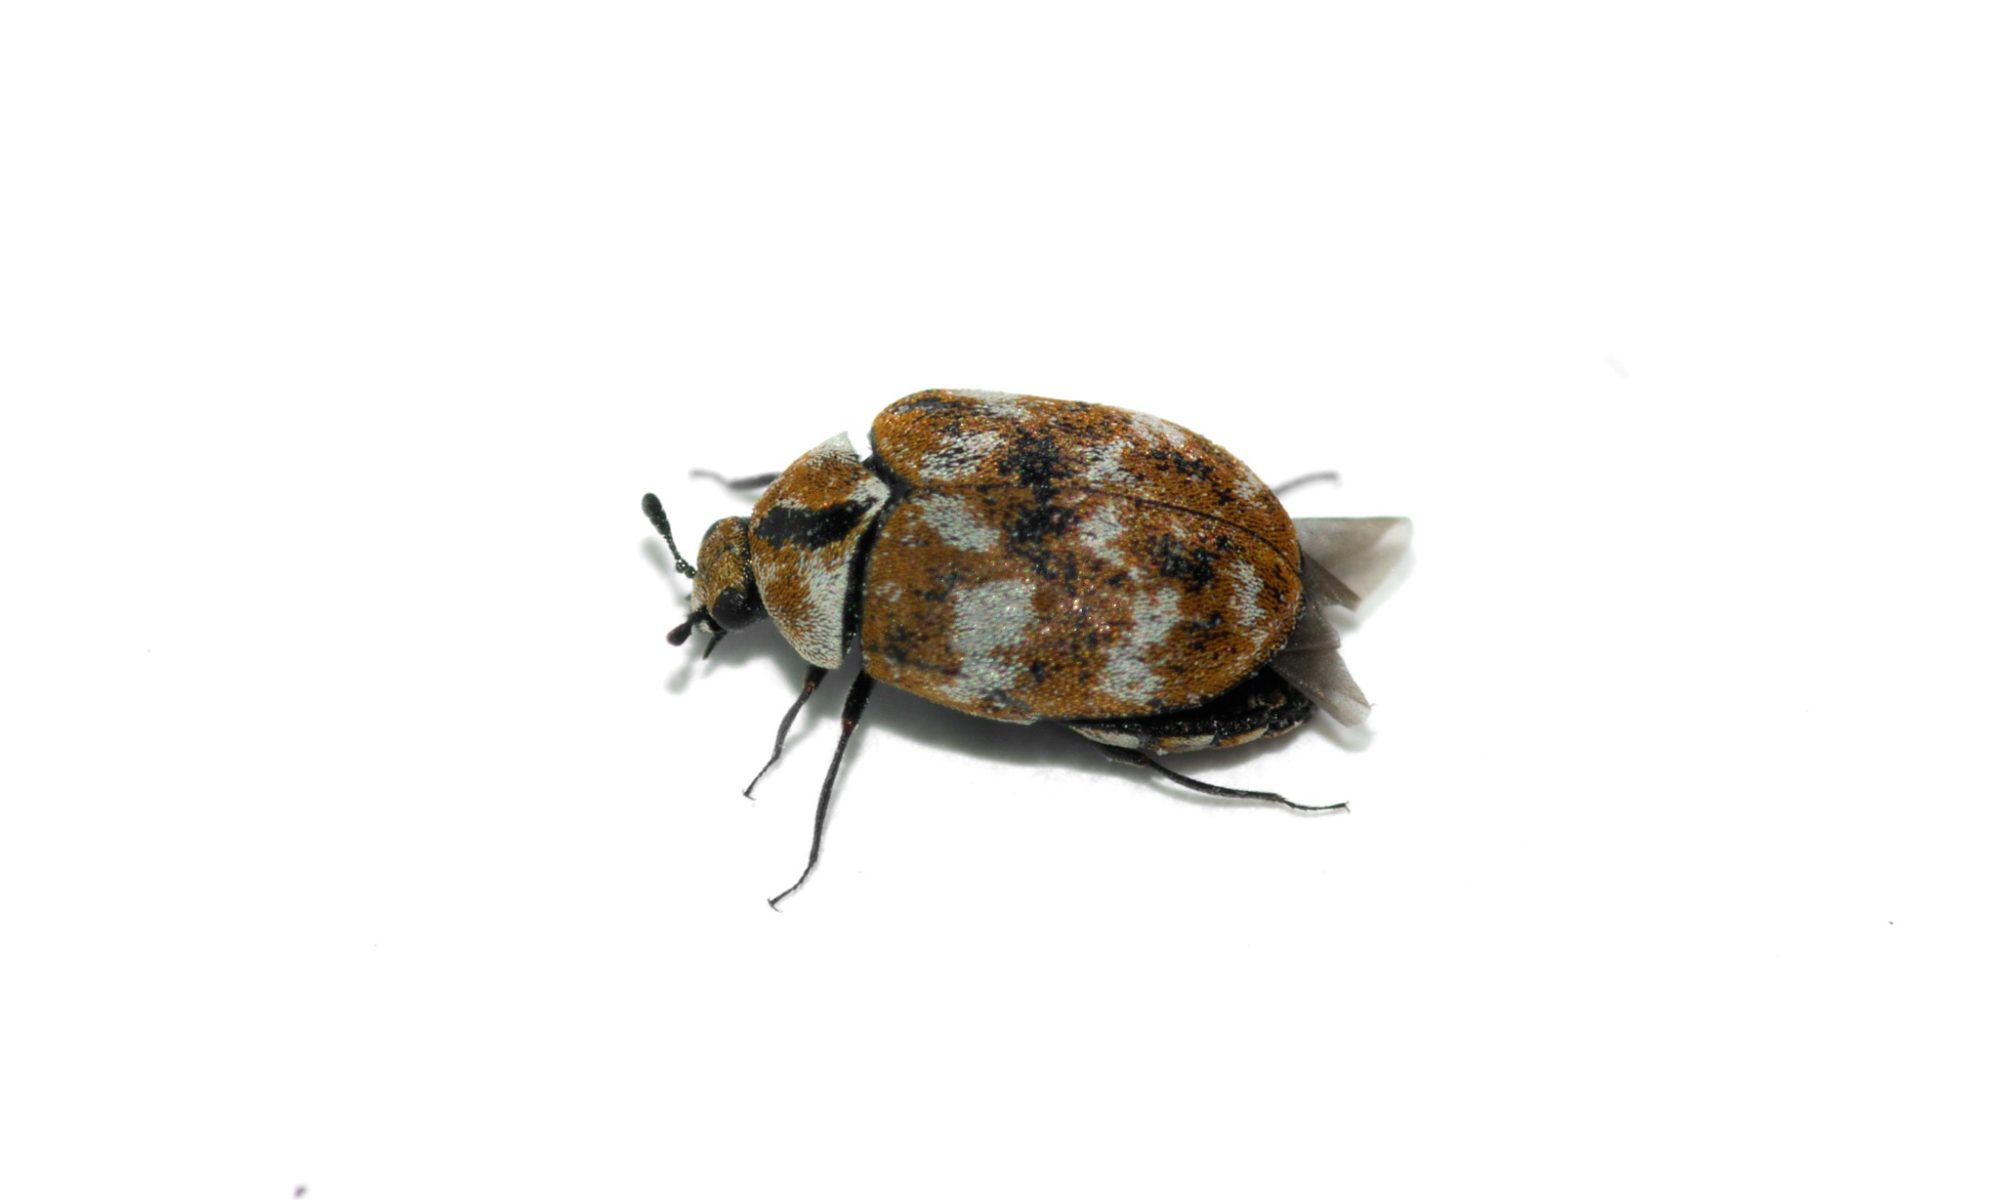 A portrait of a carpet beetle isolated on a white background